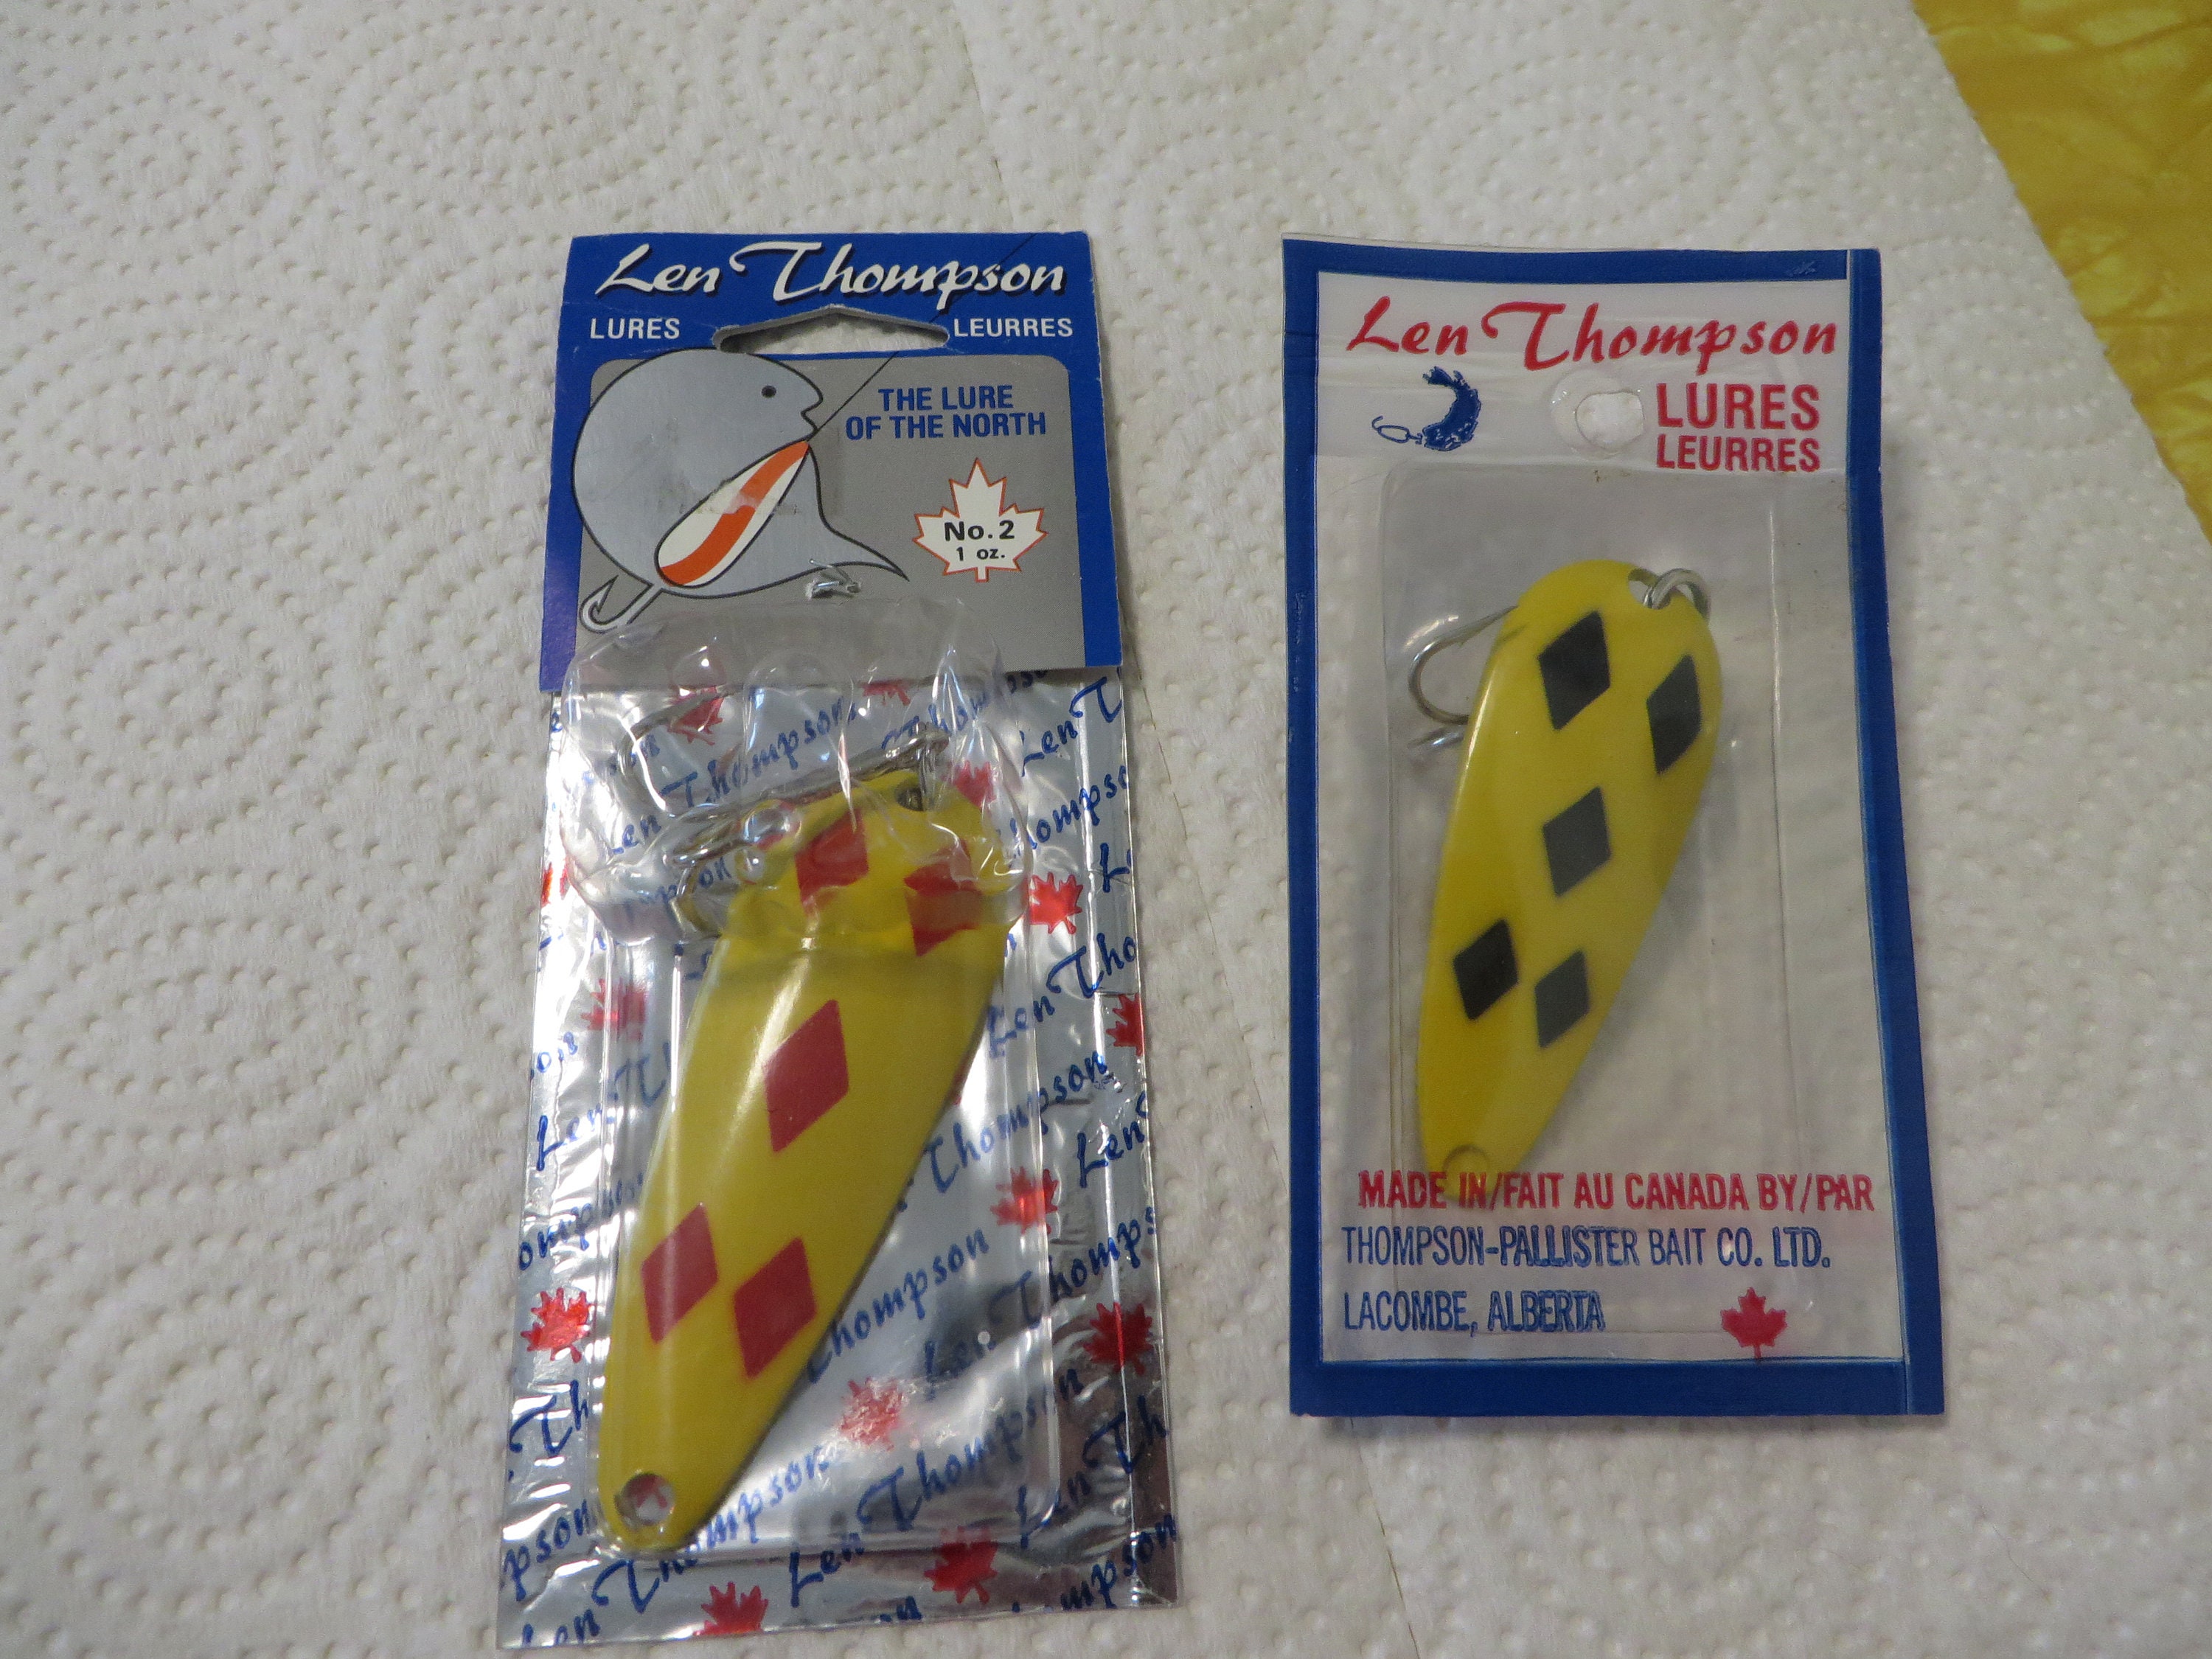 2 Len Thompson Spoon Lures in Original Packages, Black Diamond No. 1, Red  Diamond No. 2 